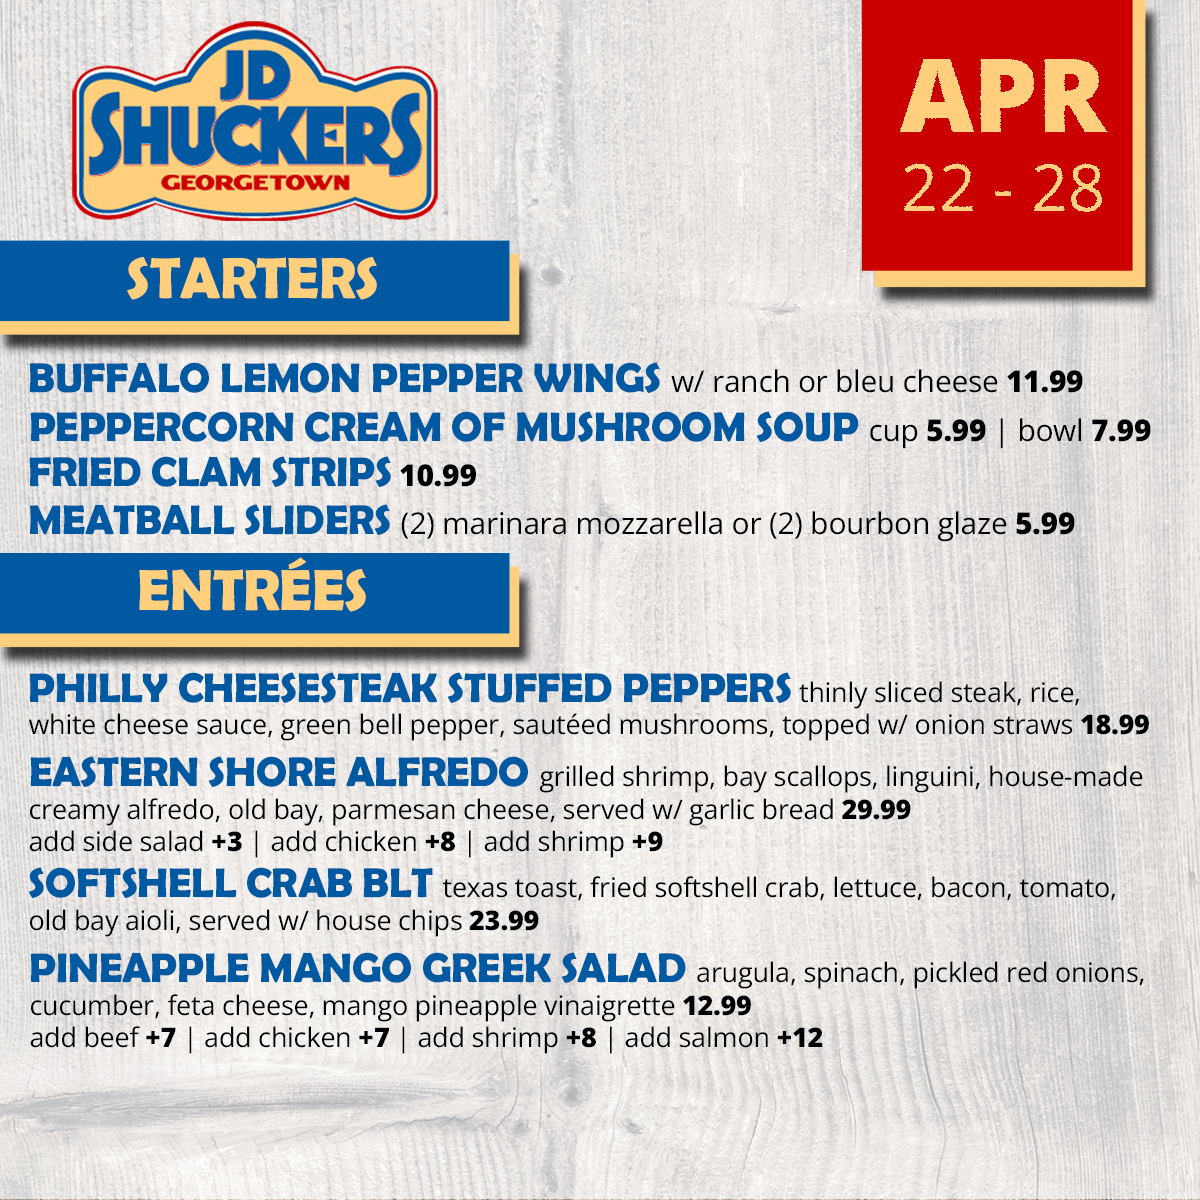 Weekly Specials at JD Shuckers Georgetown